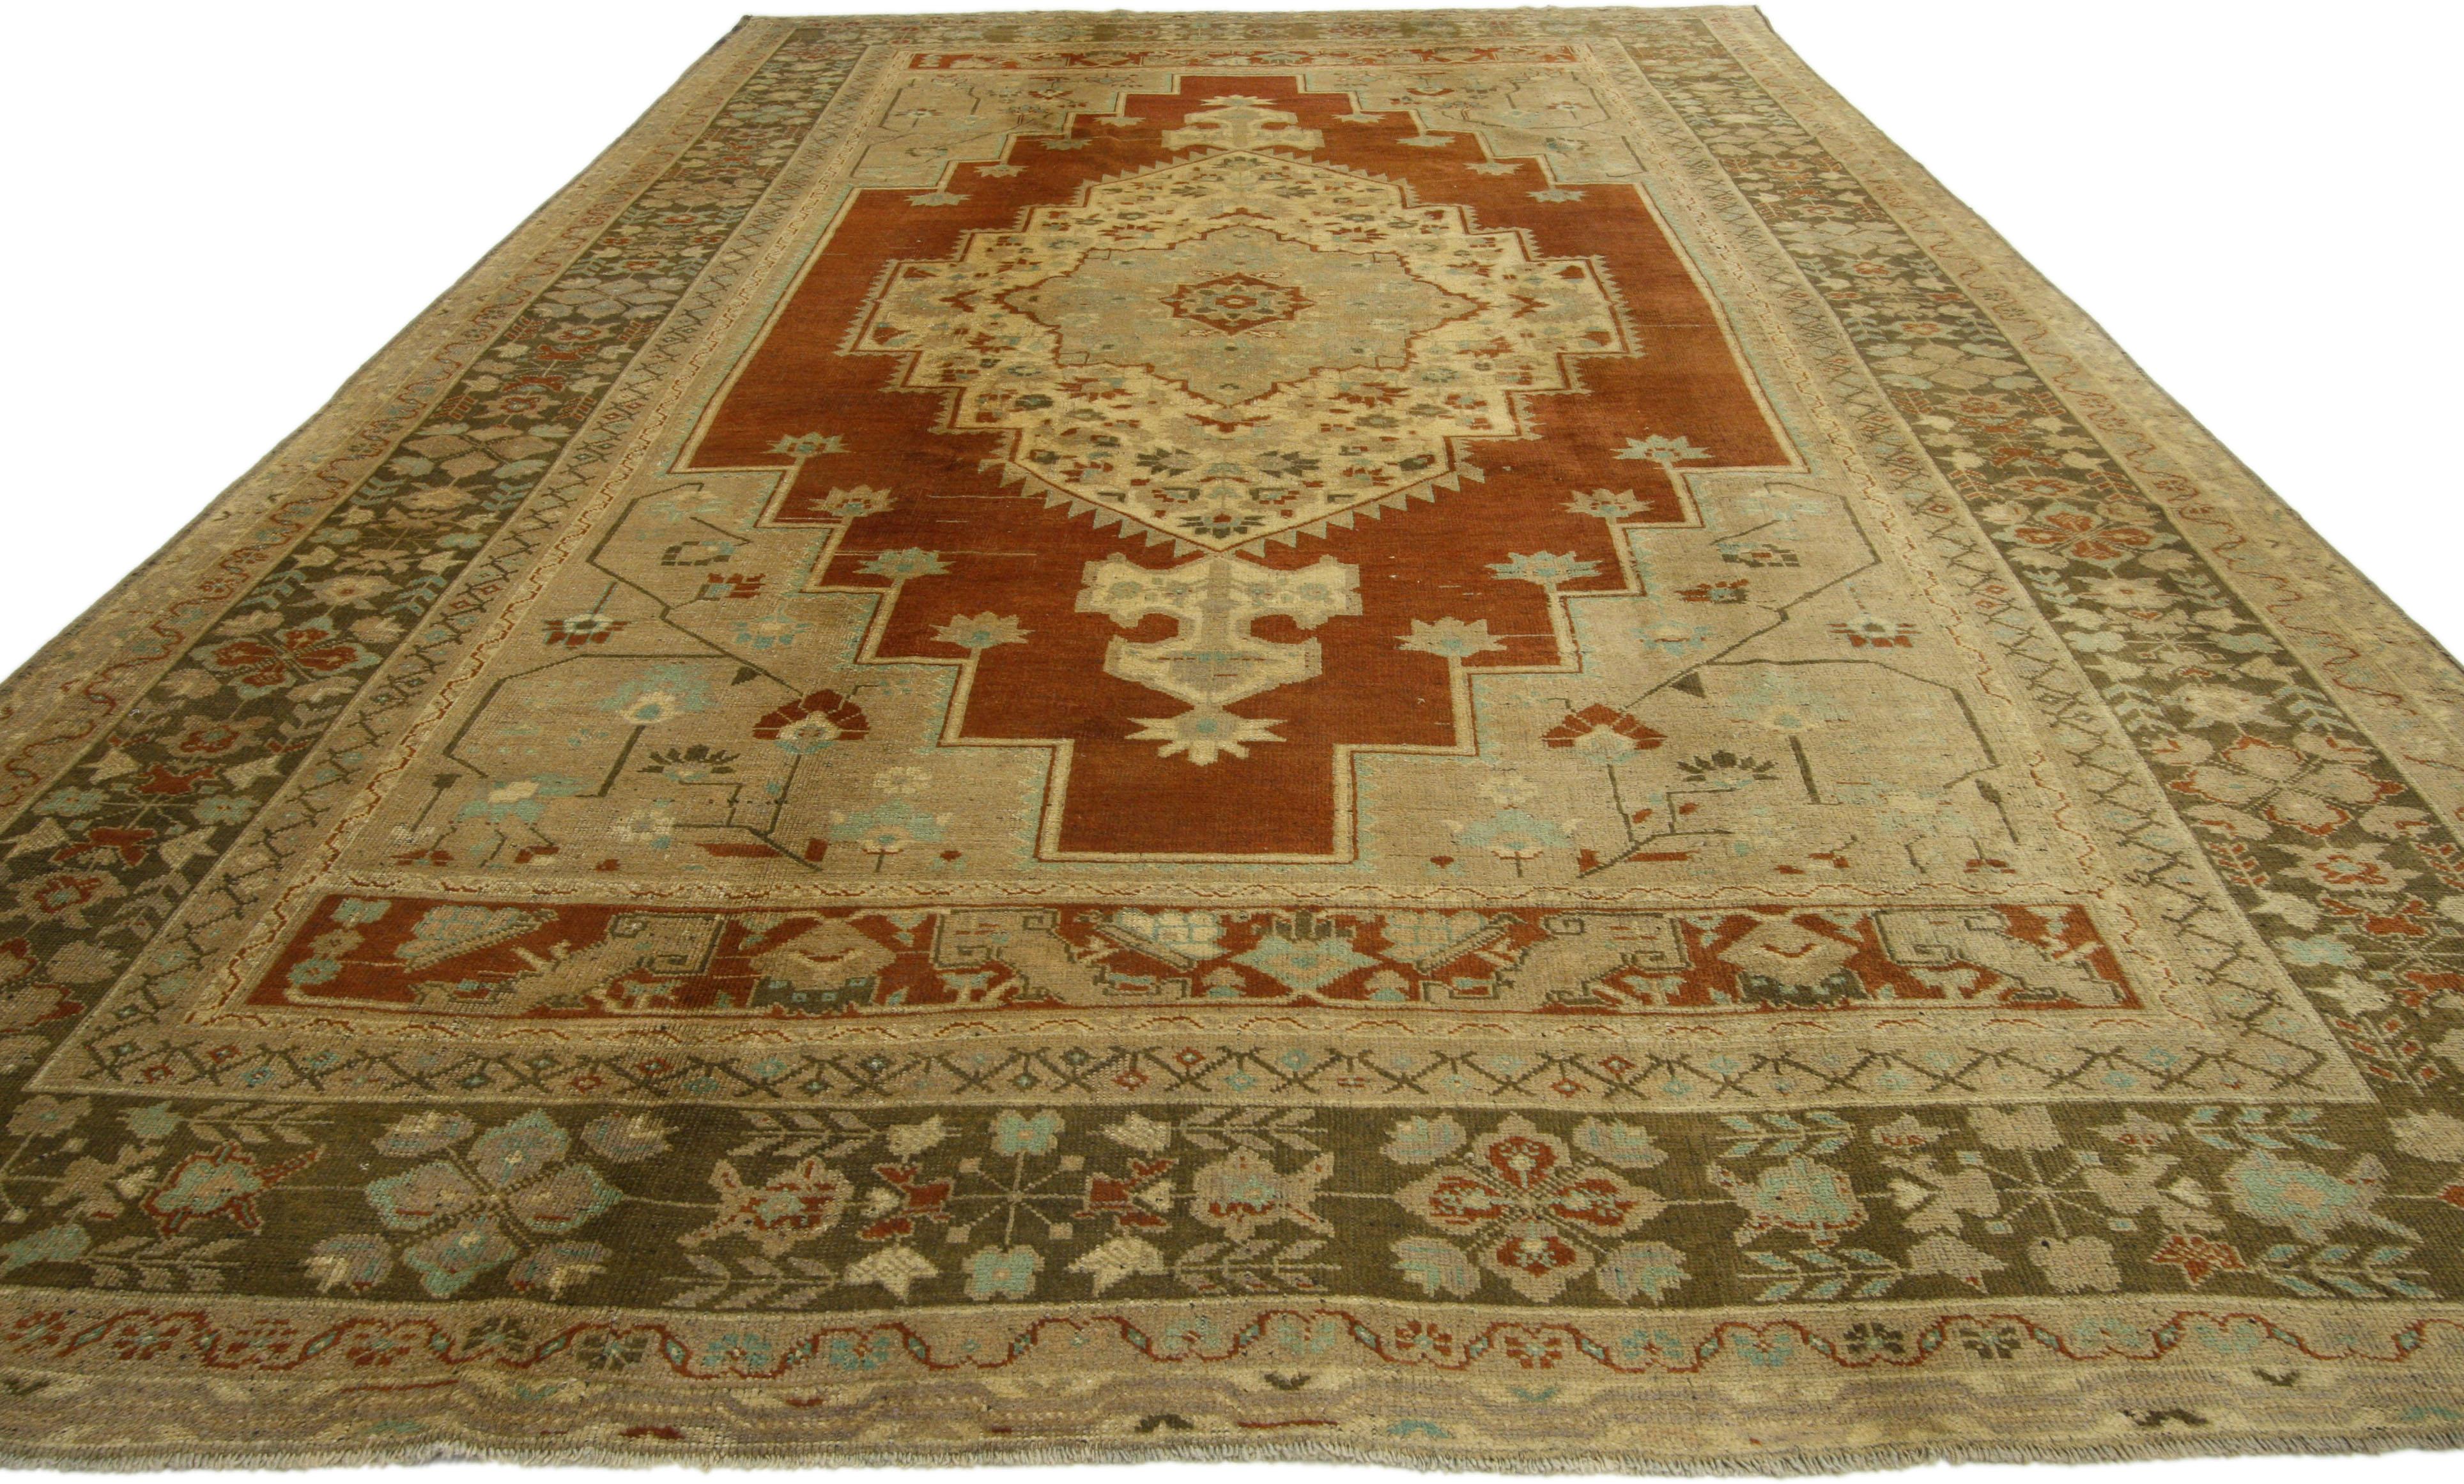 73983, vintage Turkish Oushak rug with traditional style, gallery rug featuring all medallion and corner pattern. This hand-knotted wool vintage Oushak gallery rug displays a stair-step central medallion with two cartouche finials filled with an